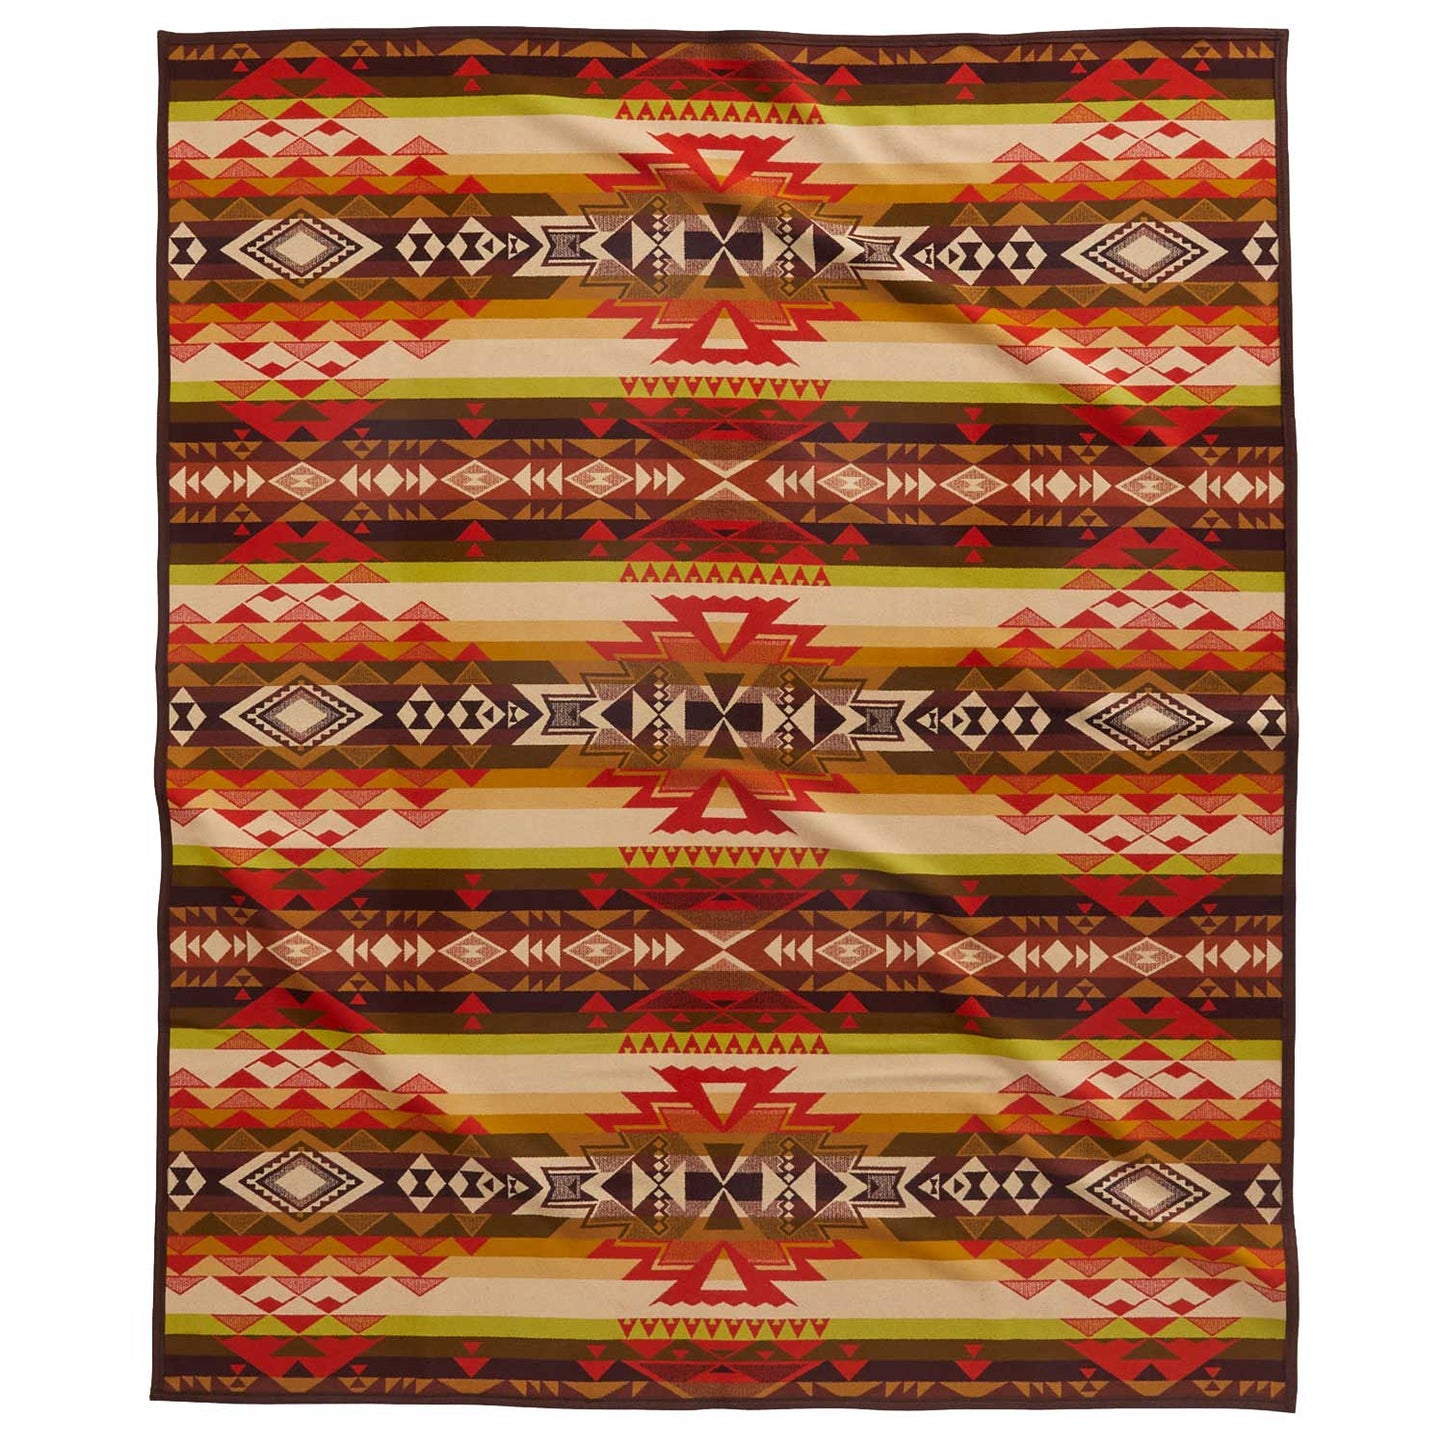 Limited Edition Highland Peak Blanket by Pendleton Chili Red